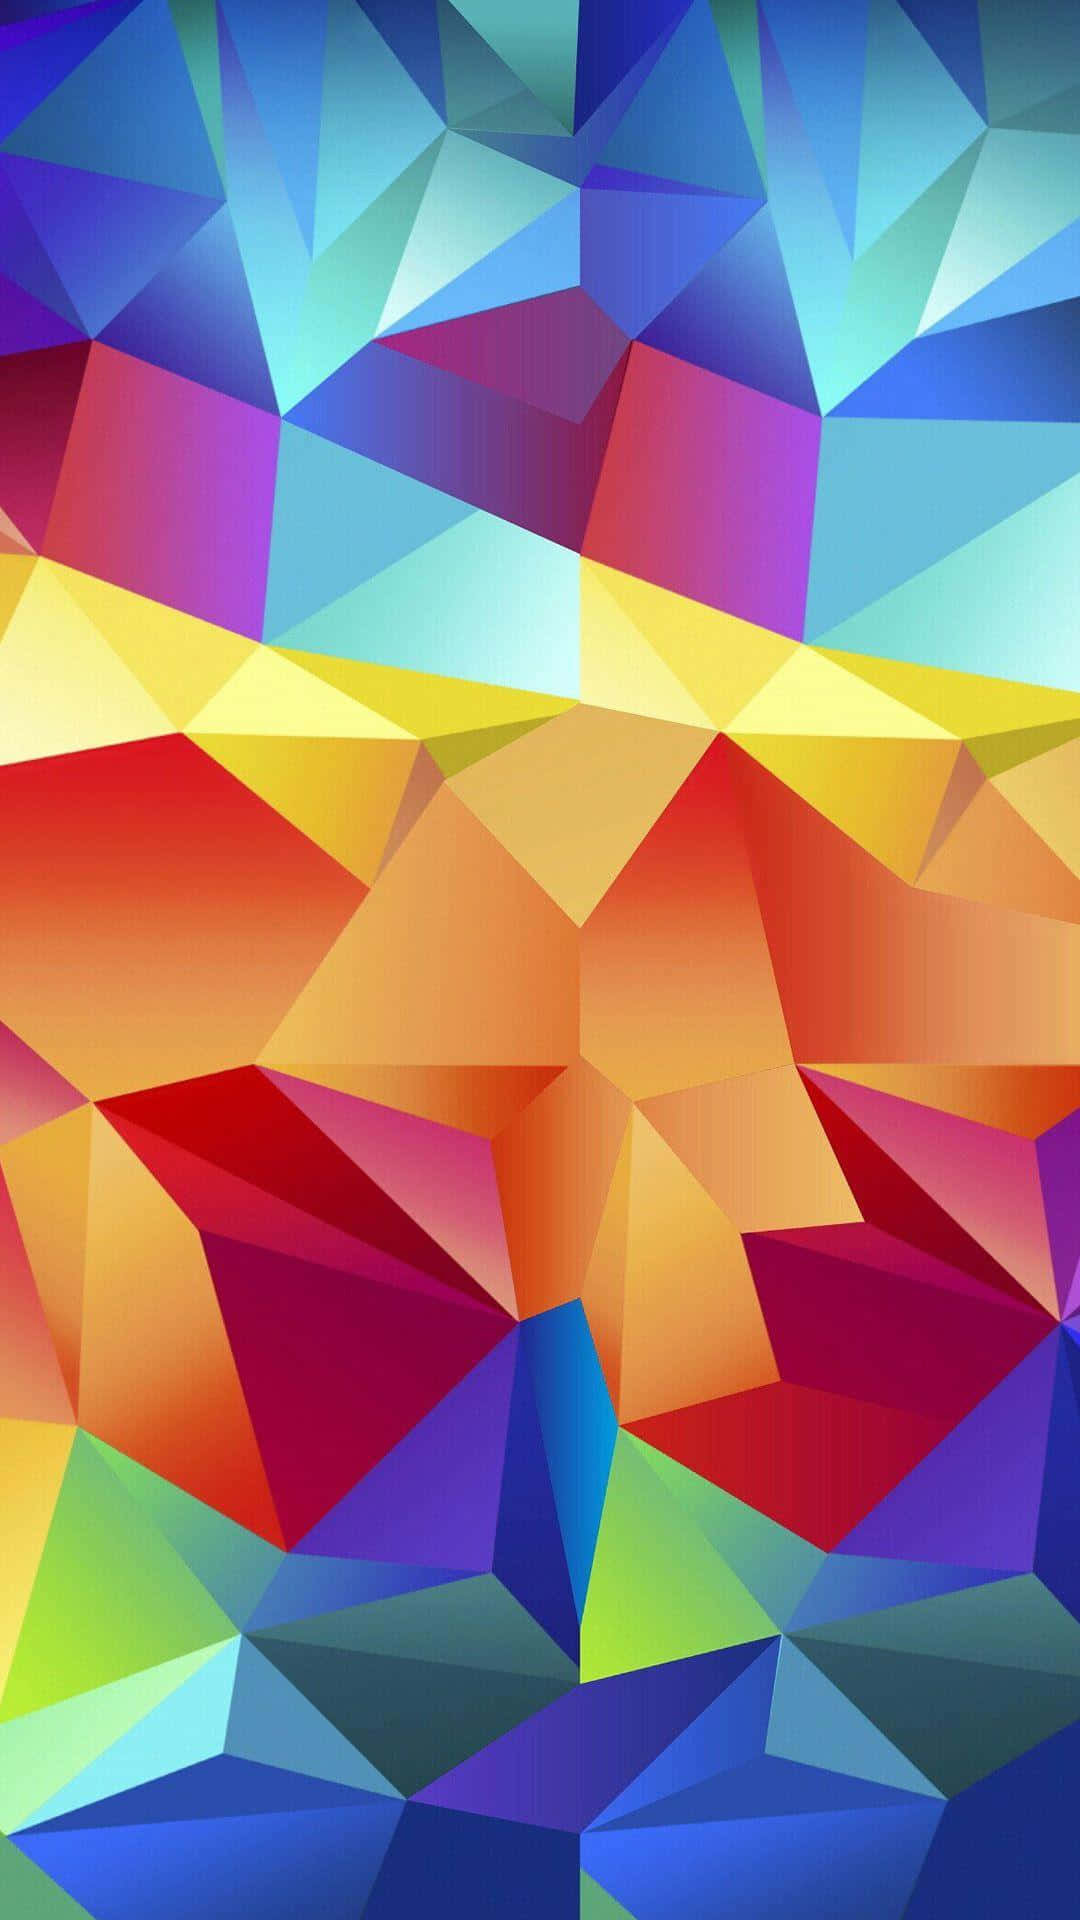 Enjoy the dynamic style of this multicolored abstract background